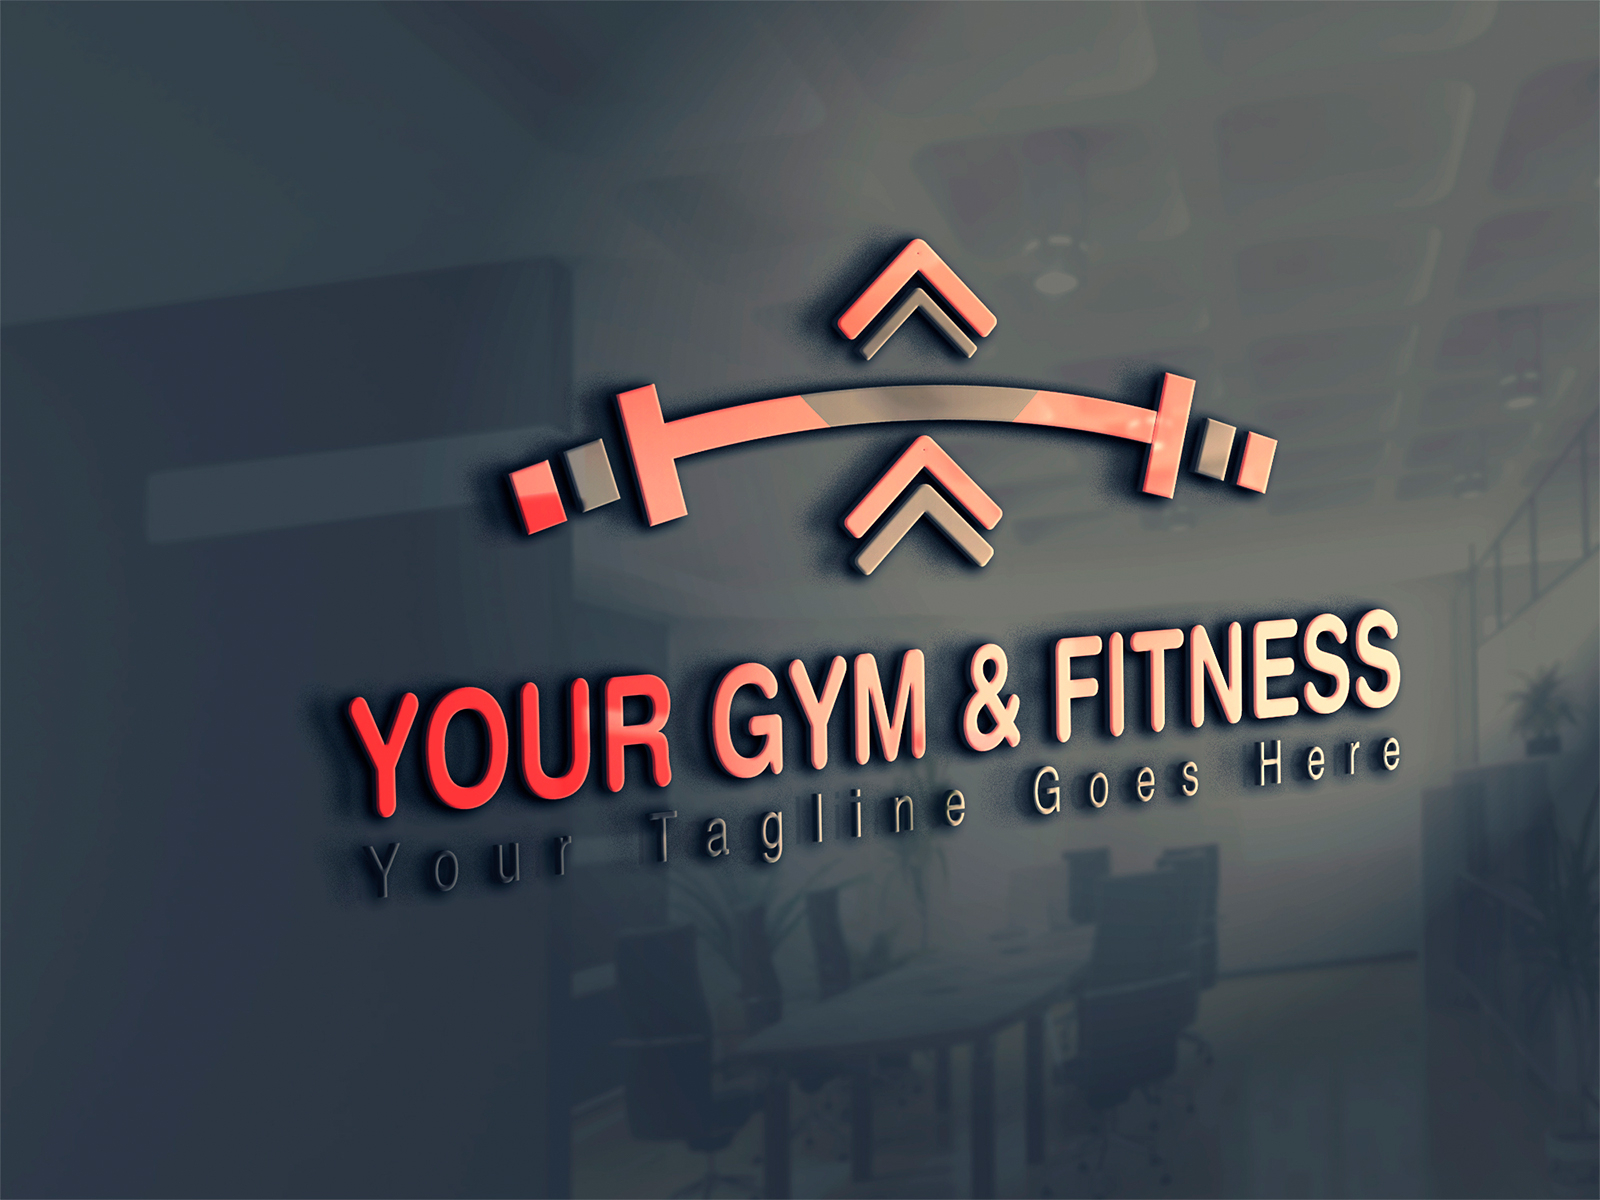 Gym and Fitness Logo by Md. Shamsul Haque on Dribbble